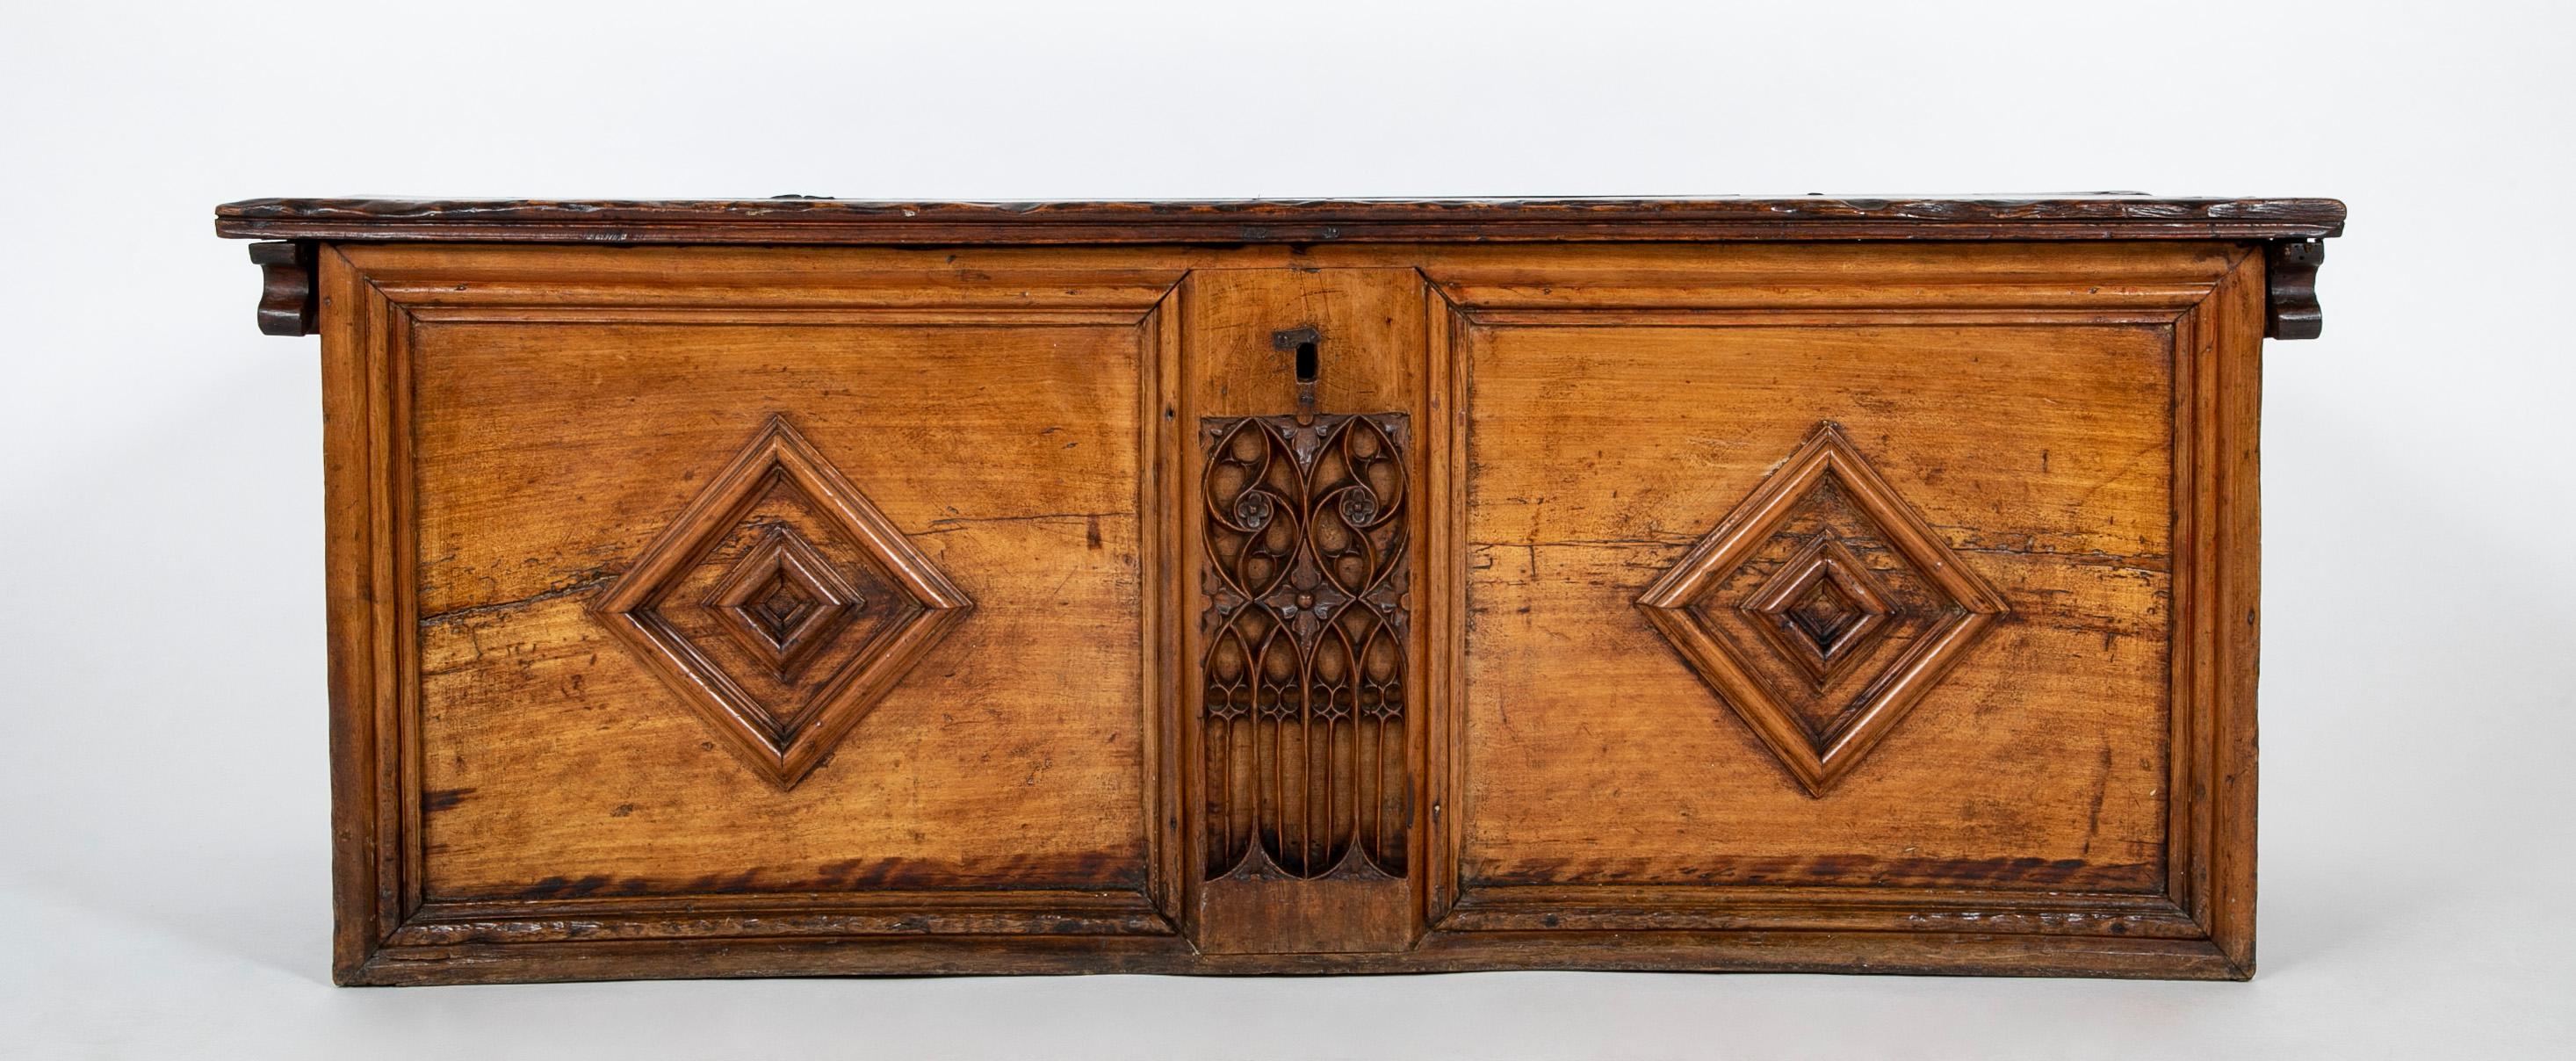 16th Century French Carved Walnut Cassone With Gothic Tracery  For Sale 1